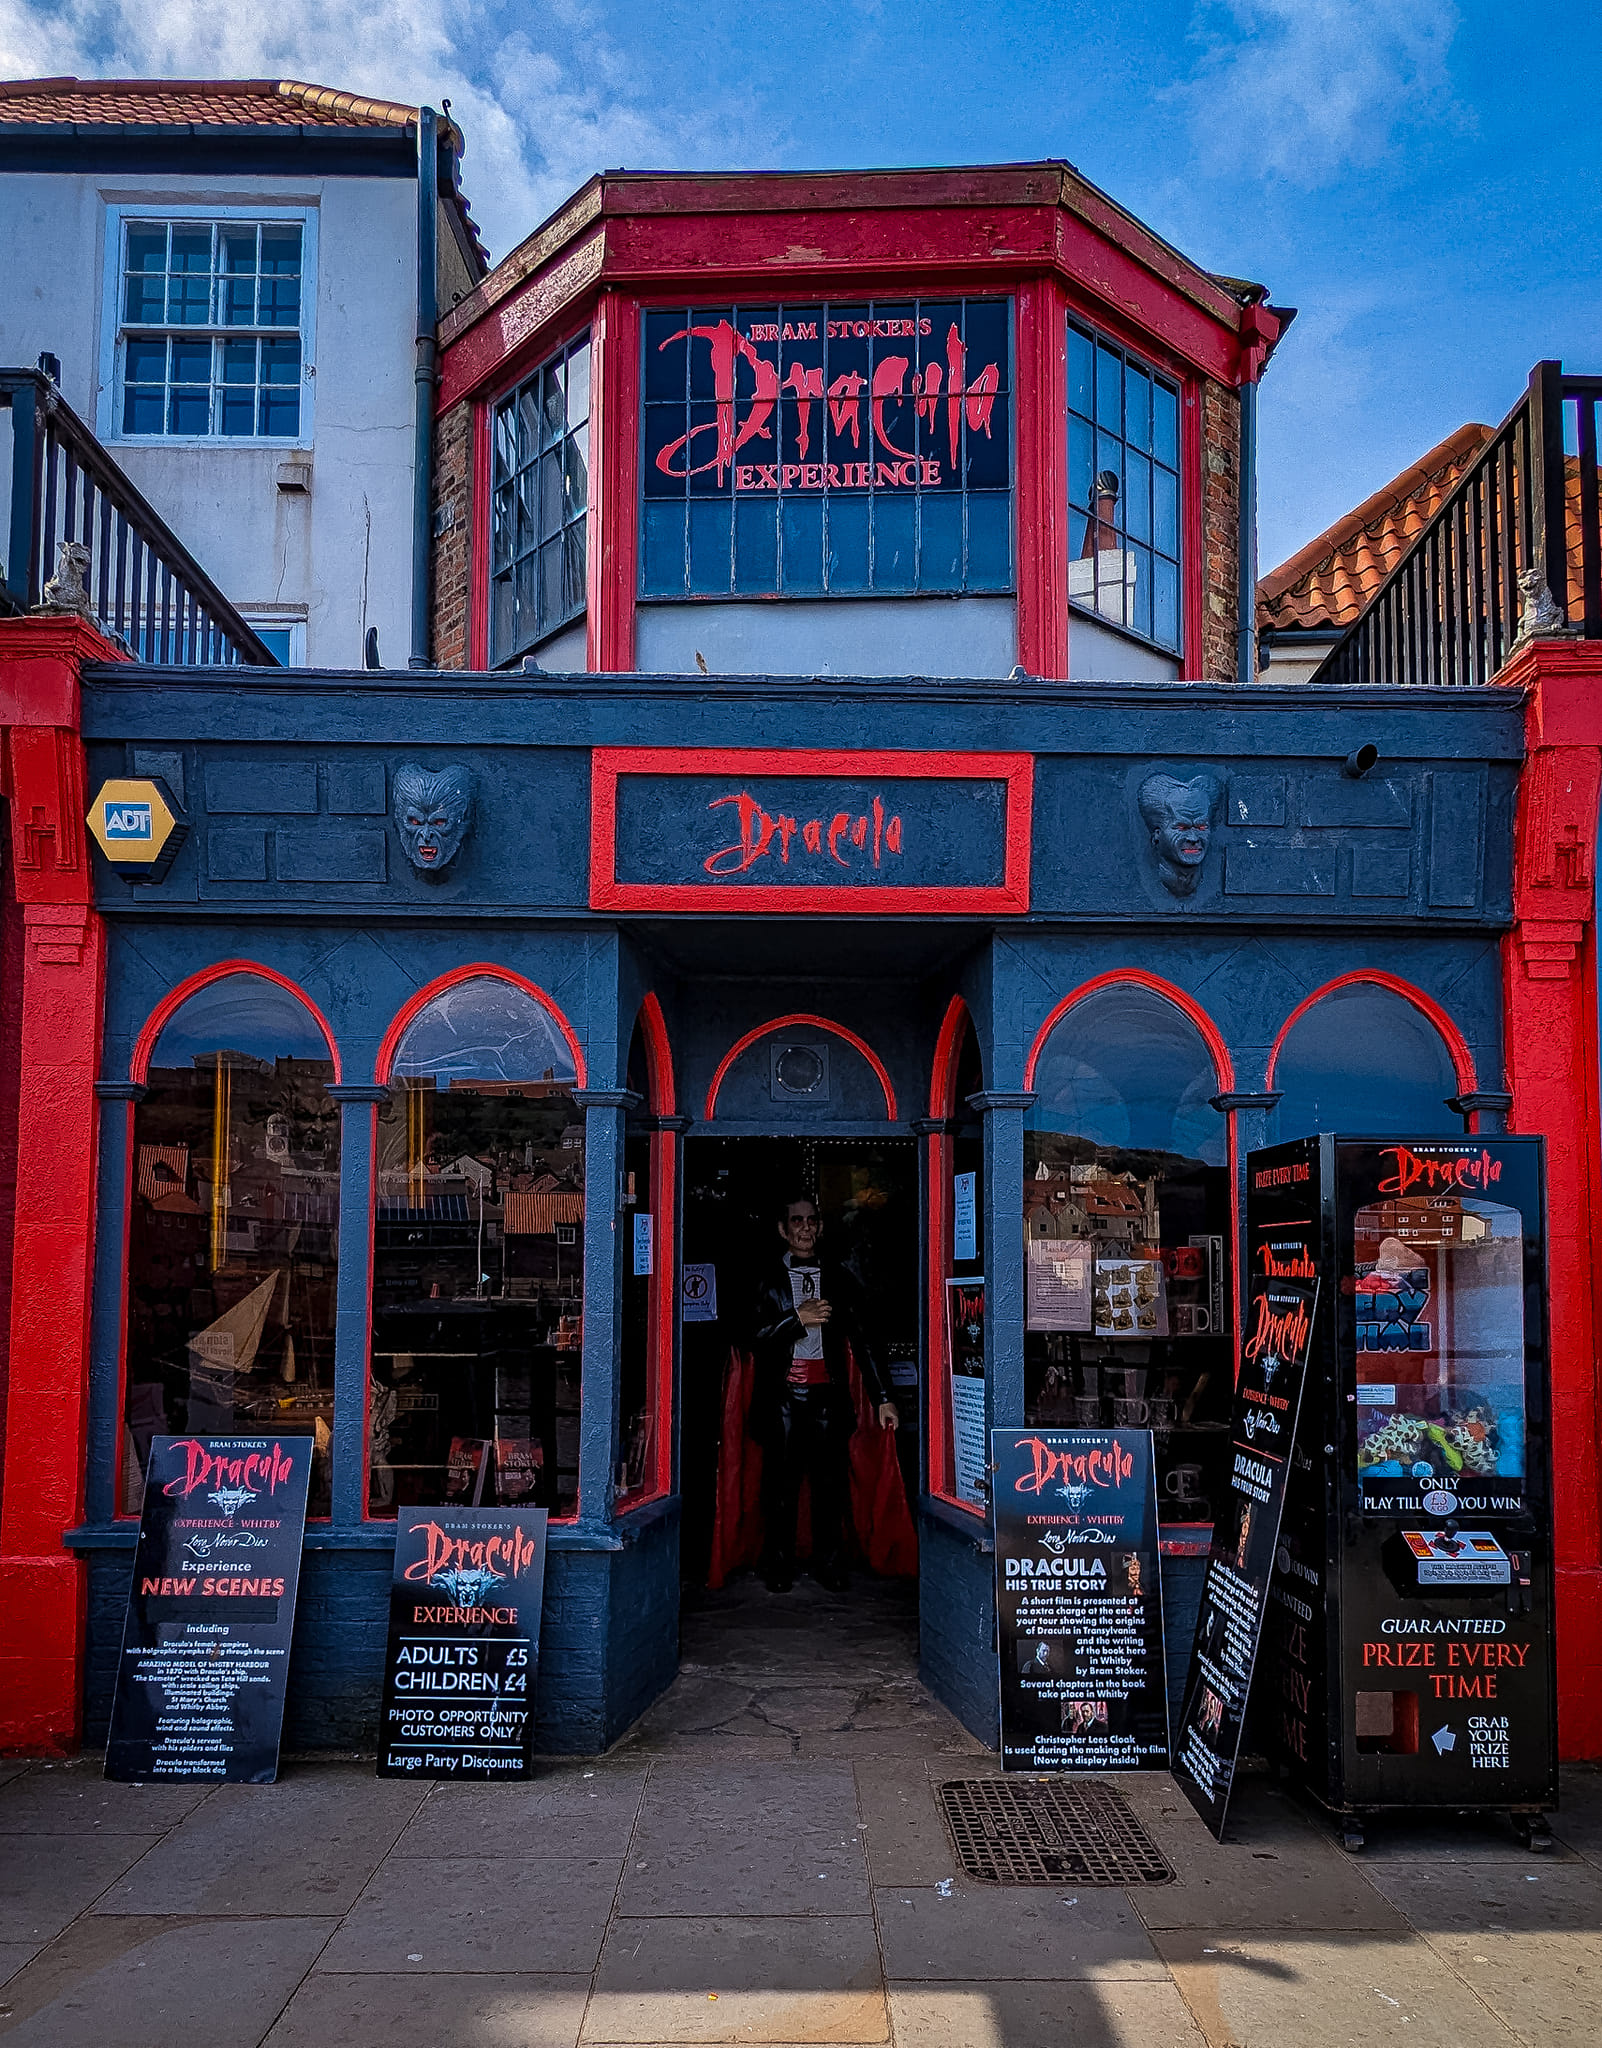 The Dracula Experience provides insight into Bram Stoker's most famous character.